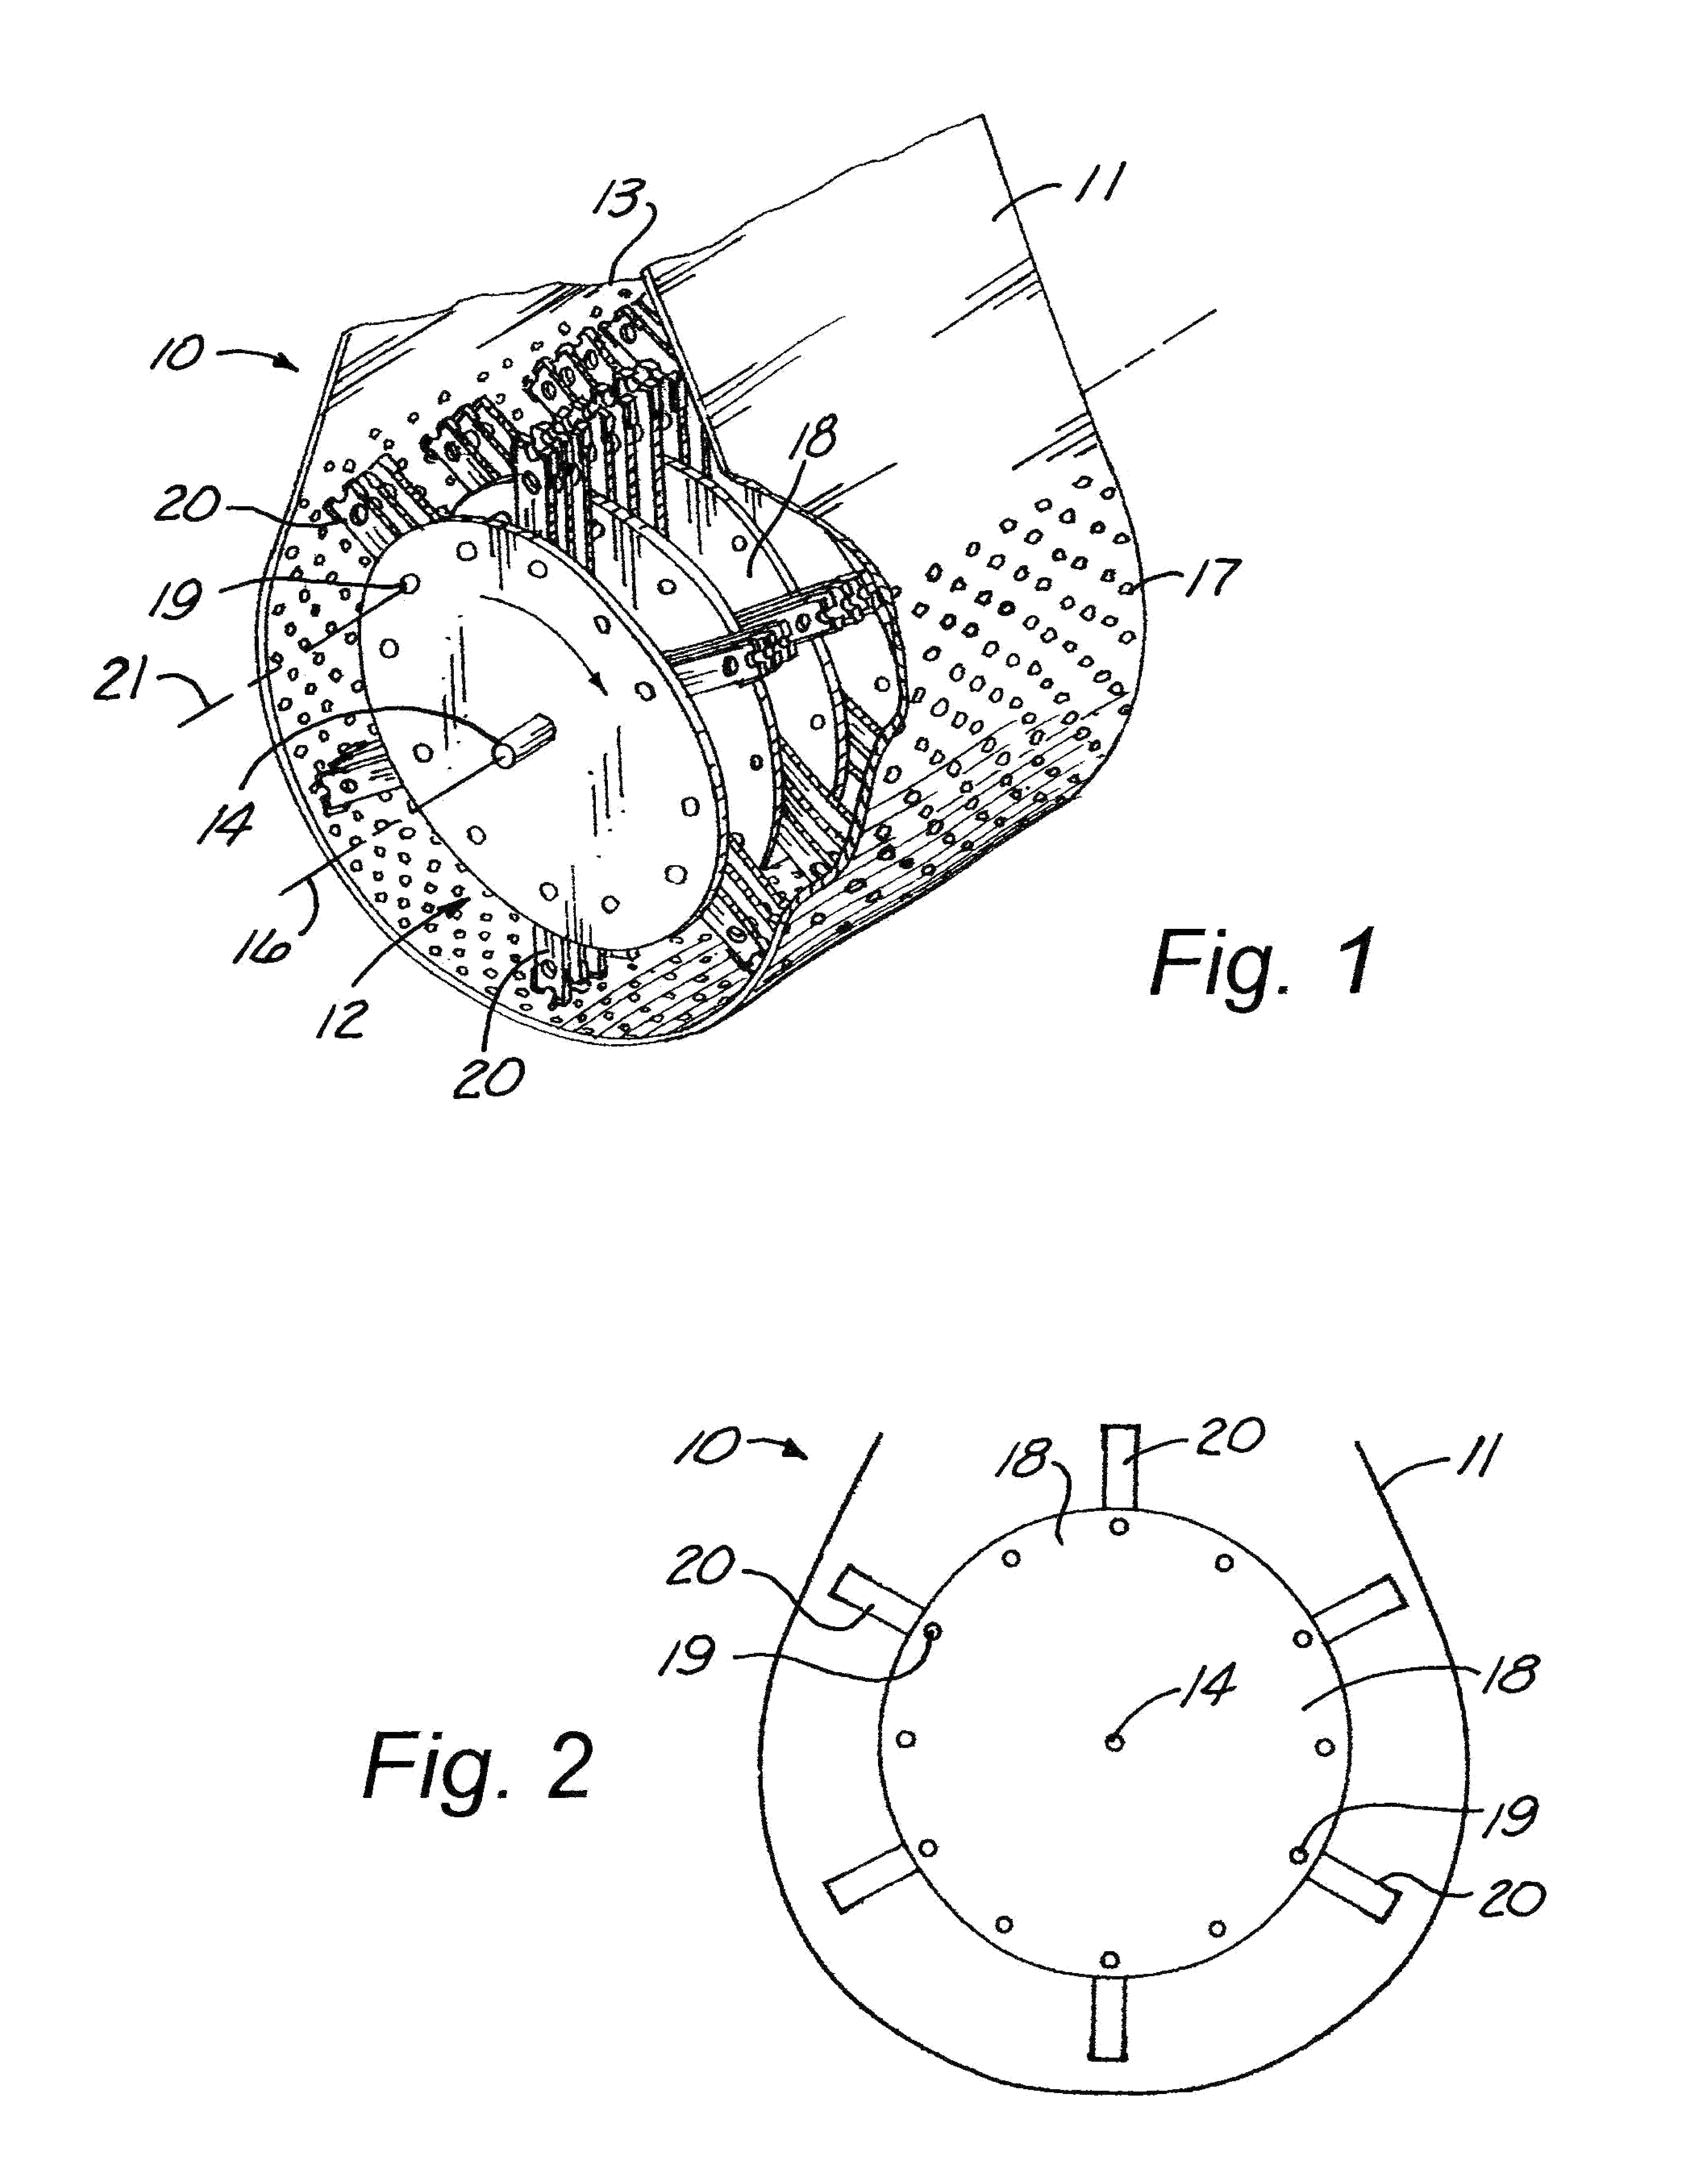 Apparatus for attaching hammers to a hammer mill